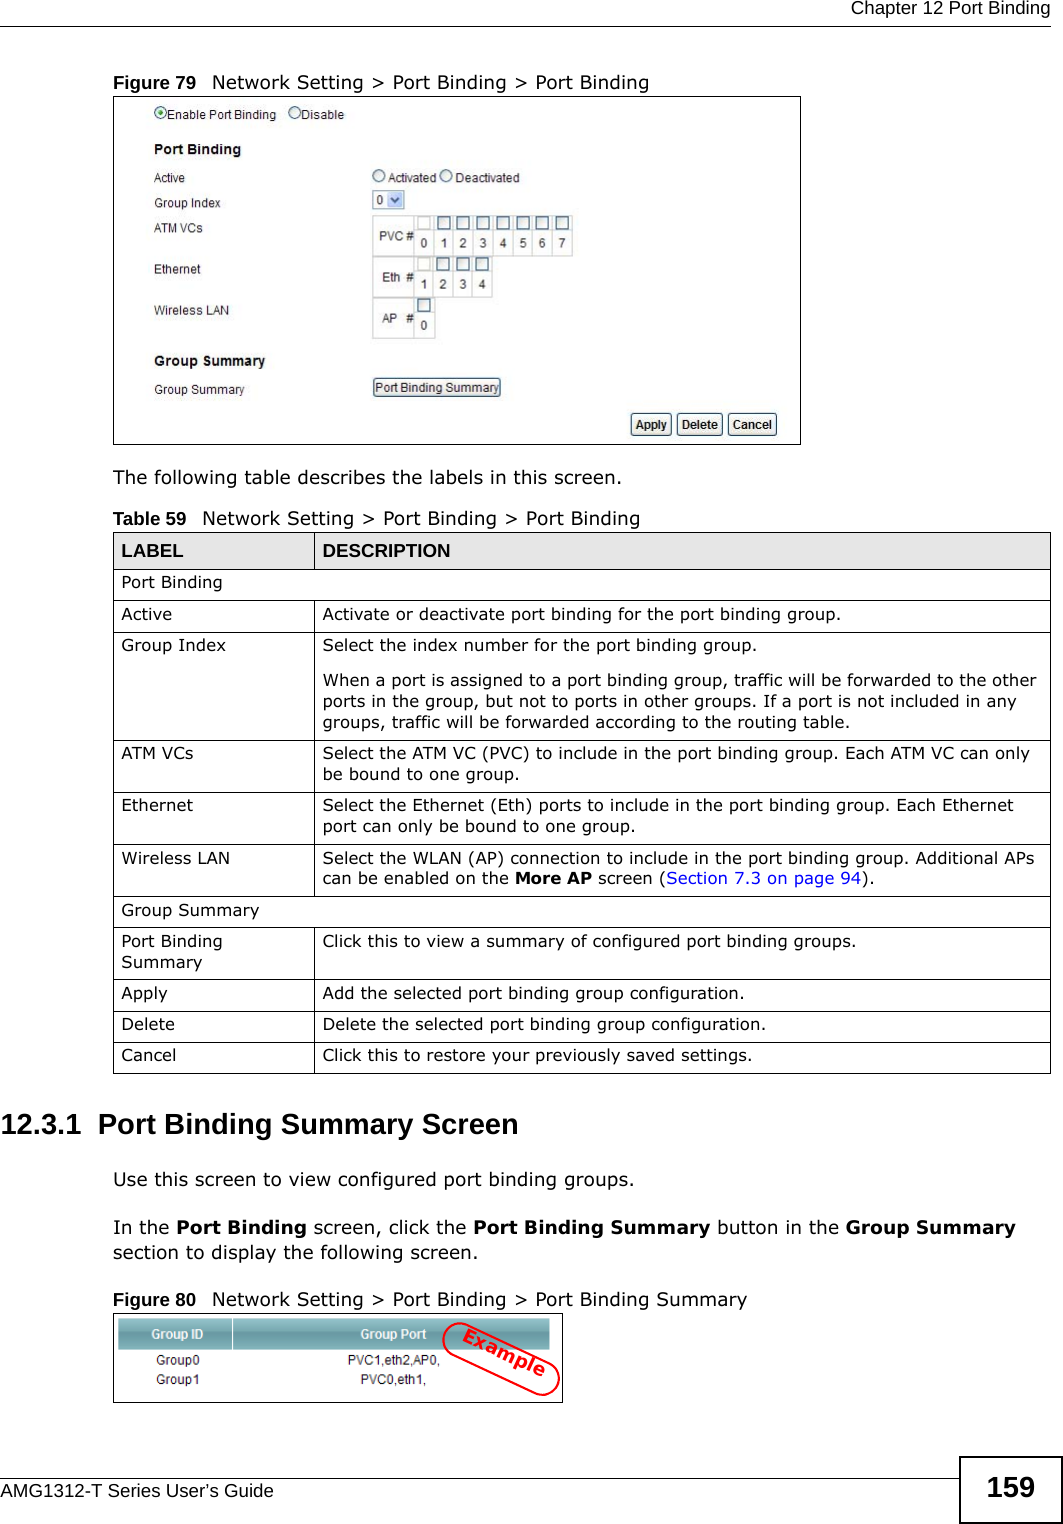  Chapter 12 Port BindingAMG1312-T Series User’s Guide 159Figure 79   Network Setting &gt; Port Binding &gt; Port BindingThe following table describes the labels in this screen. 12.3.1  Port Binding Summary ScreenUse this screen to view configured port binding groups.In the Port Binding screen, click the Port Binding Summary button in the Group Summary section to display the following screen.Figure 80   Network Setting &gt; Port Binding &gt; Port Binding SummaryTable 59   Network Setting &gt; Port Binding &gt; Port BindingLABEL DESCRIPTIONPort BindingActive Activate or deactivate port binding for the port binding group.Group Index Select the index number for the port binding group. When a port is assigned to a port binding group, traffic will be forwarded to the other ports in the group, but not to ports in other groups. If a port is not included in any groups, traffic will be forwarded according to the routing table.ATM VCs Select the ATM VC (PVC) to include in the port binding group. Each ATM VC can only be bound to one group.Ethernet Select the Ethernet (Eth) ports to include in the port binding group. Each Ethernet port can only be bound to one group.Wireless LAN Select the WLAN (AP) connection to include in the port binding group. Additional APs can be enabled on the More AP screen (Section 7.3 on page 94).Group SummaryPort Binding SummaryClick this to view a summary of configured port binding groups.Apply Add the selected port binding group configuration.Delete Delete the selected port binding group configuration. Cancel Click this to restore your previously saved settings.Example